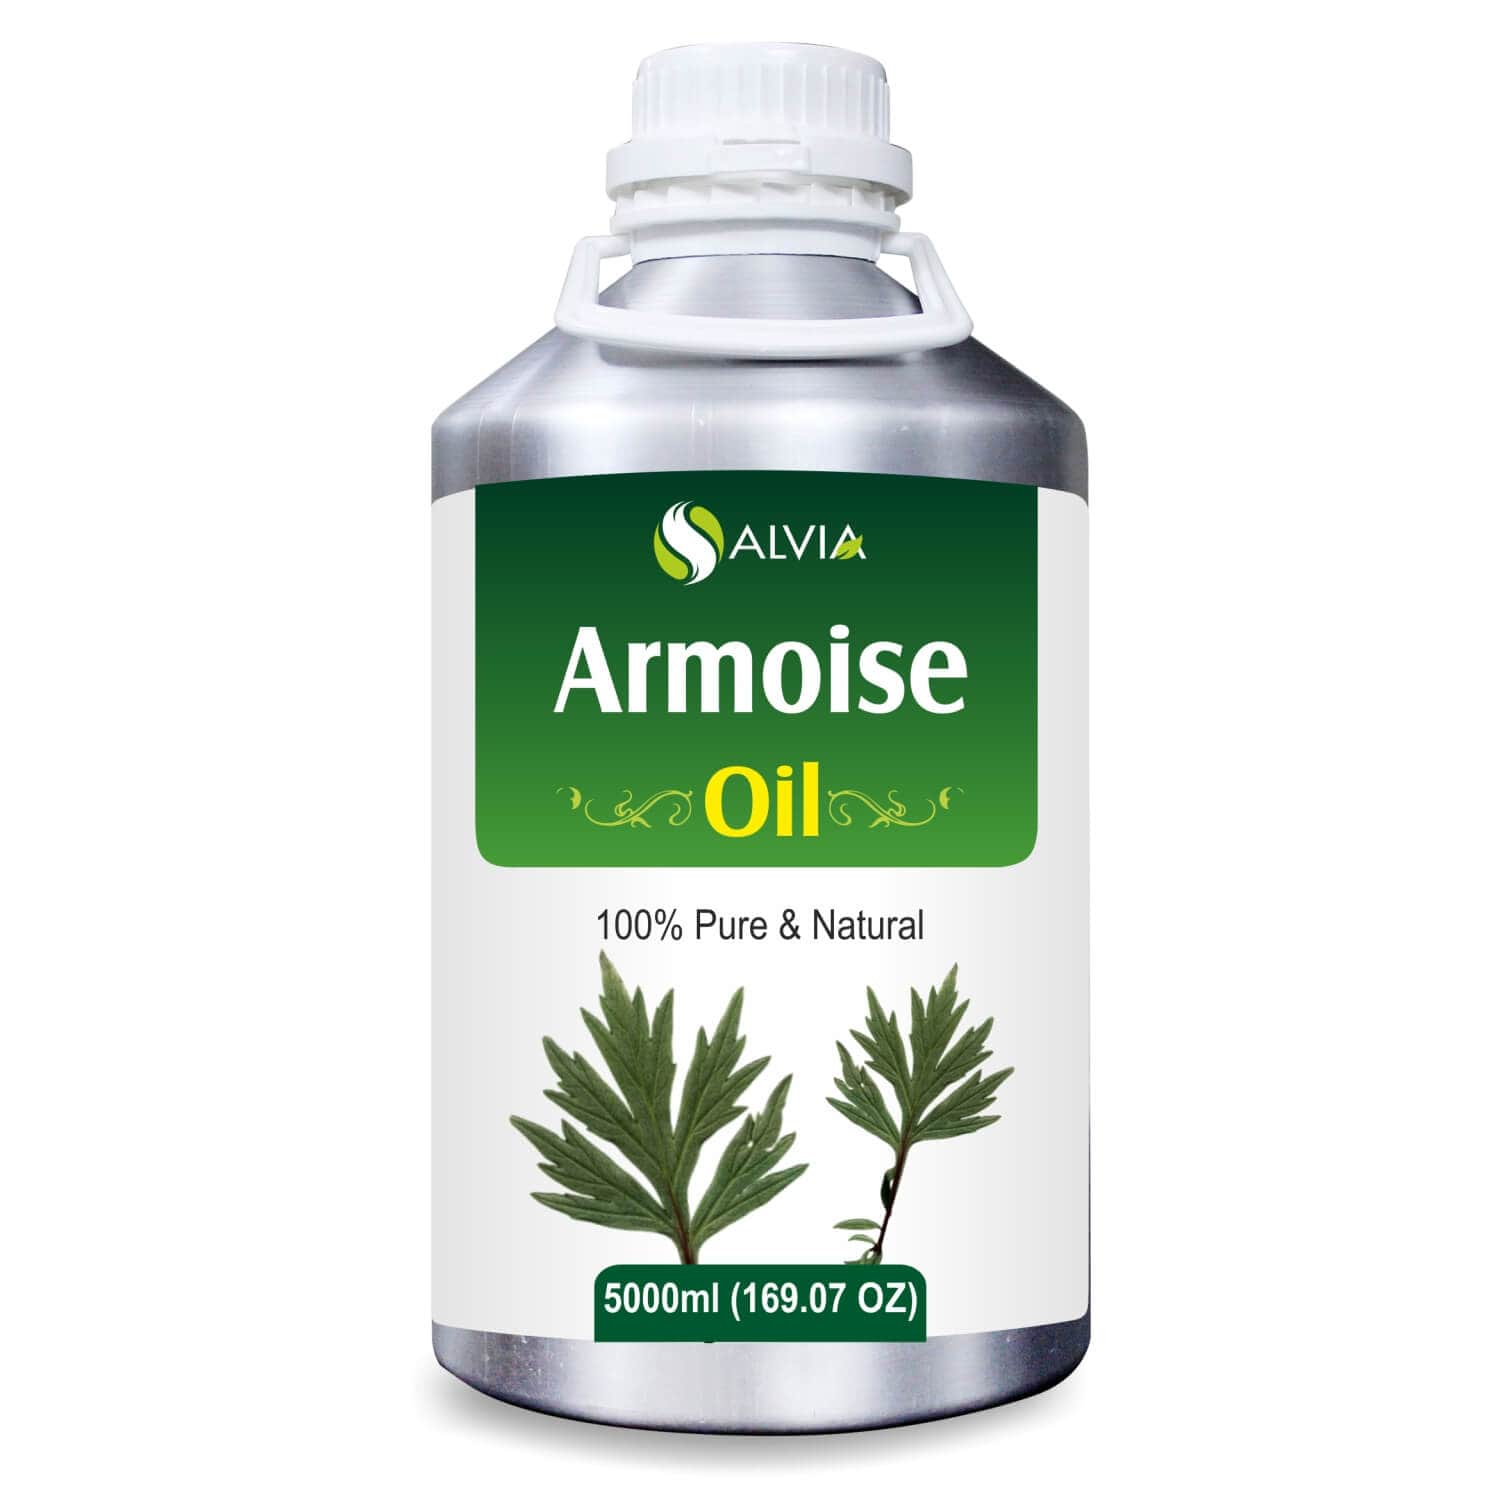 Salvia Natural Essential Oils 5000ml Armoise Oil (Pimpinella Anisum) 100% Natural Pure Essential Oil For Tension Reliever, Relief Pain, Body oil, & Natural Remedies